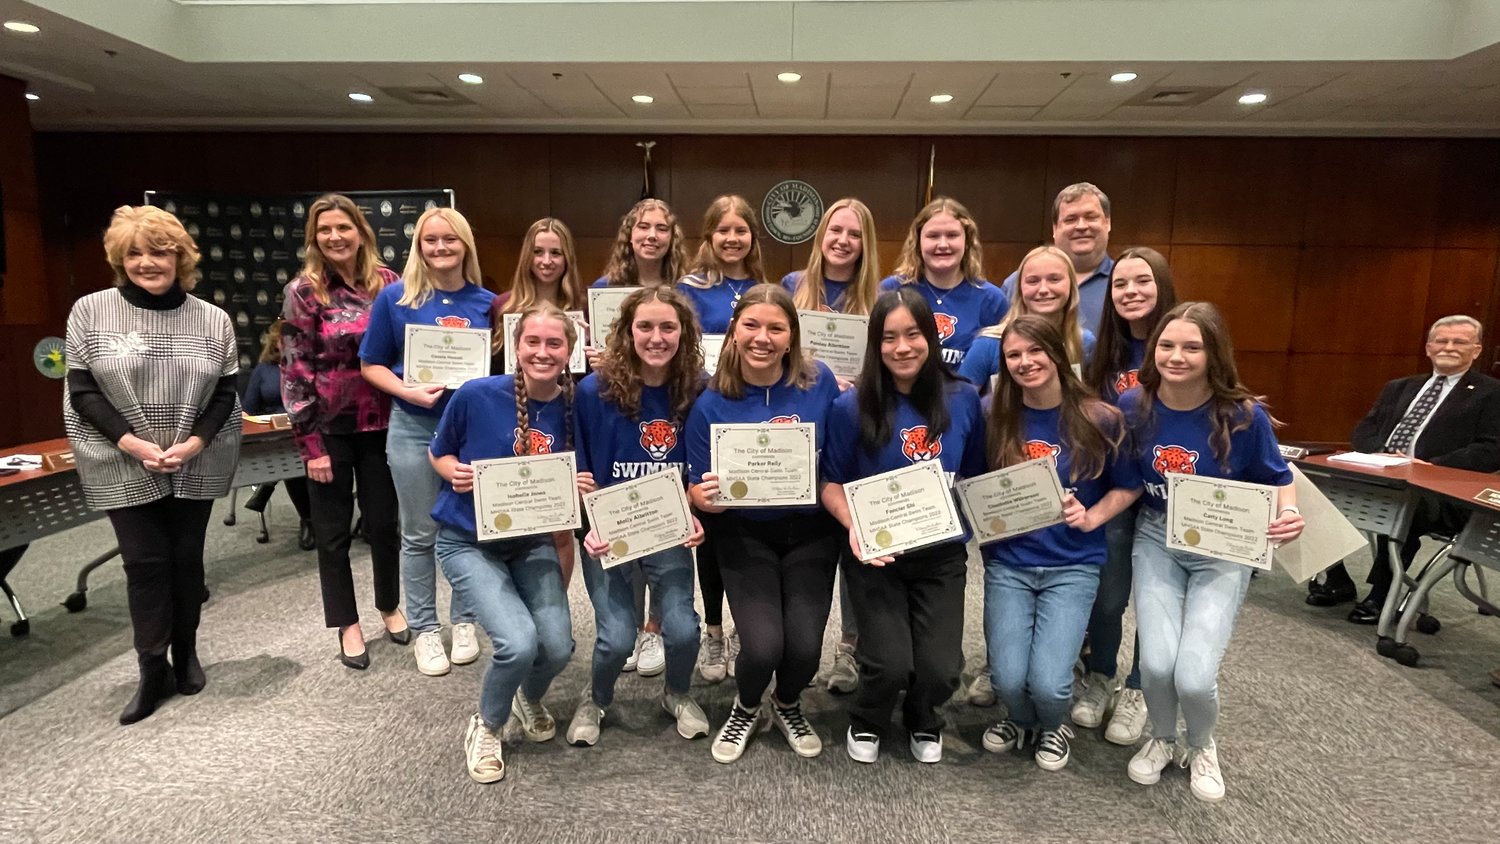 The Madison Central Girls' Swim Team was recognized during Madison's Jan. 17 board meeting and received certificates honoring their ninth-consecutive state championship win. Each girl received a certificate, including Molly Albritton, Paisley Albritton, Sarah Covington, Abby Jo Flowers, Brooklyn Gallagher, Cassie Howell, Isabelle Jones, Carly Long, Mollee Messer, Isabelle Pike, Parker Reily, Fancier Shi, Ella Thomas, and Charlotte Wilkerson.